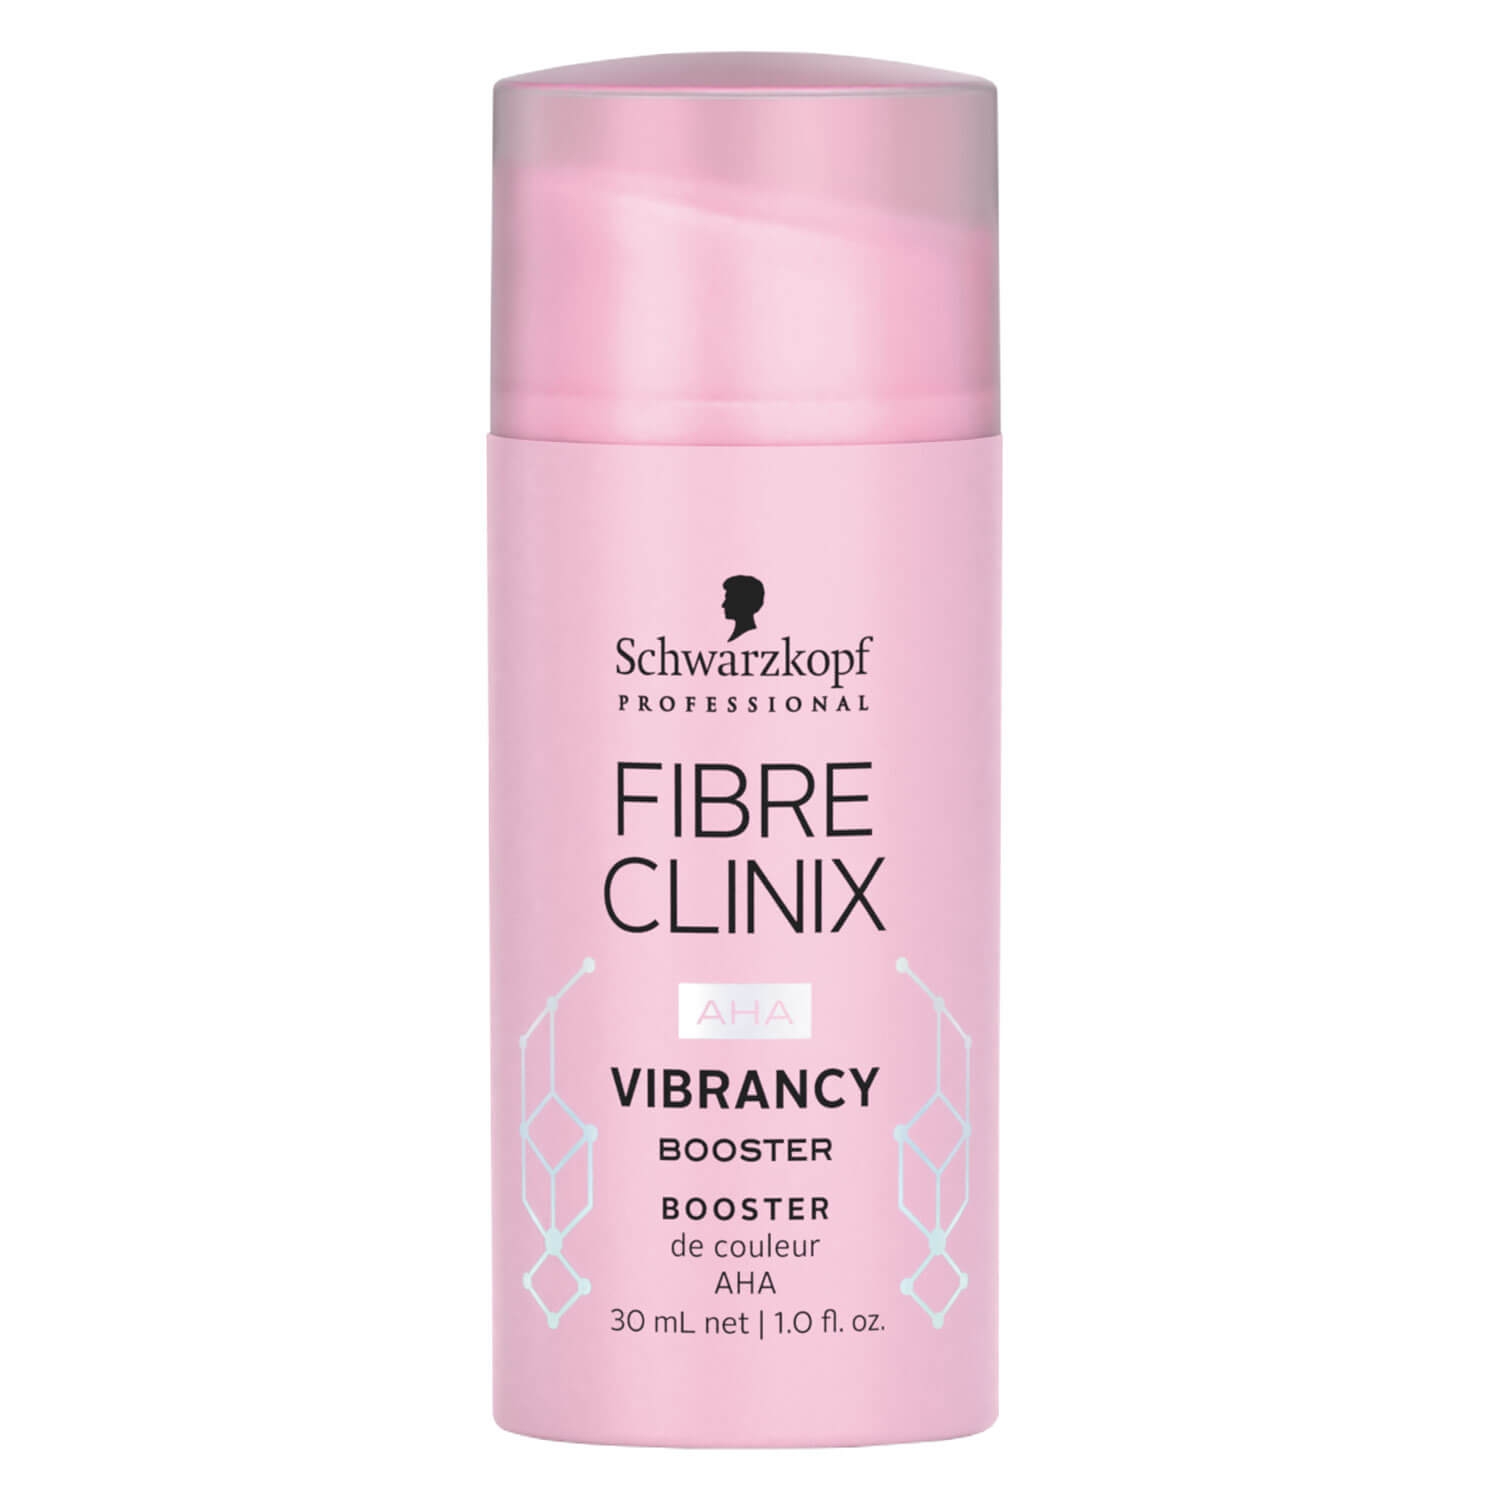 Product image from Fibre Clinix - Vibrancy Booster